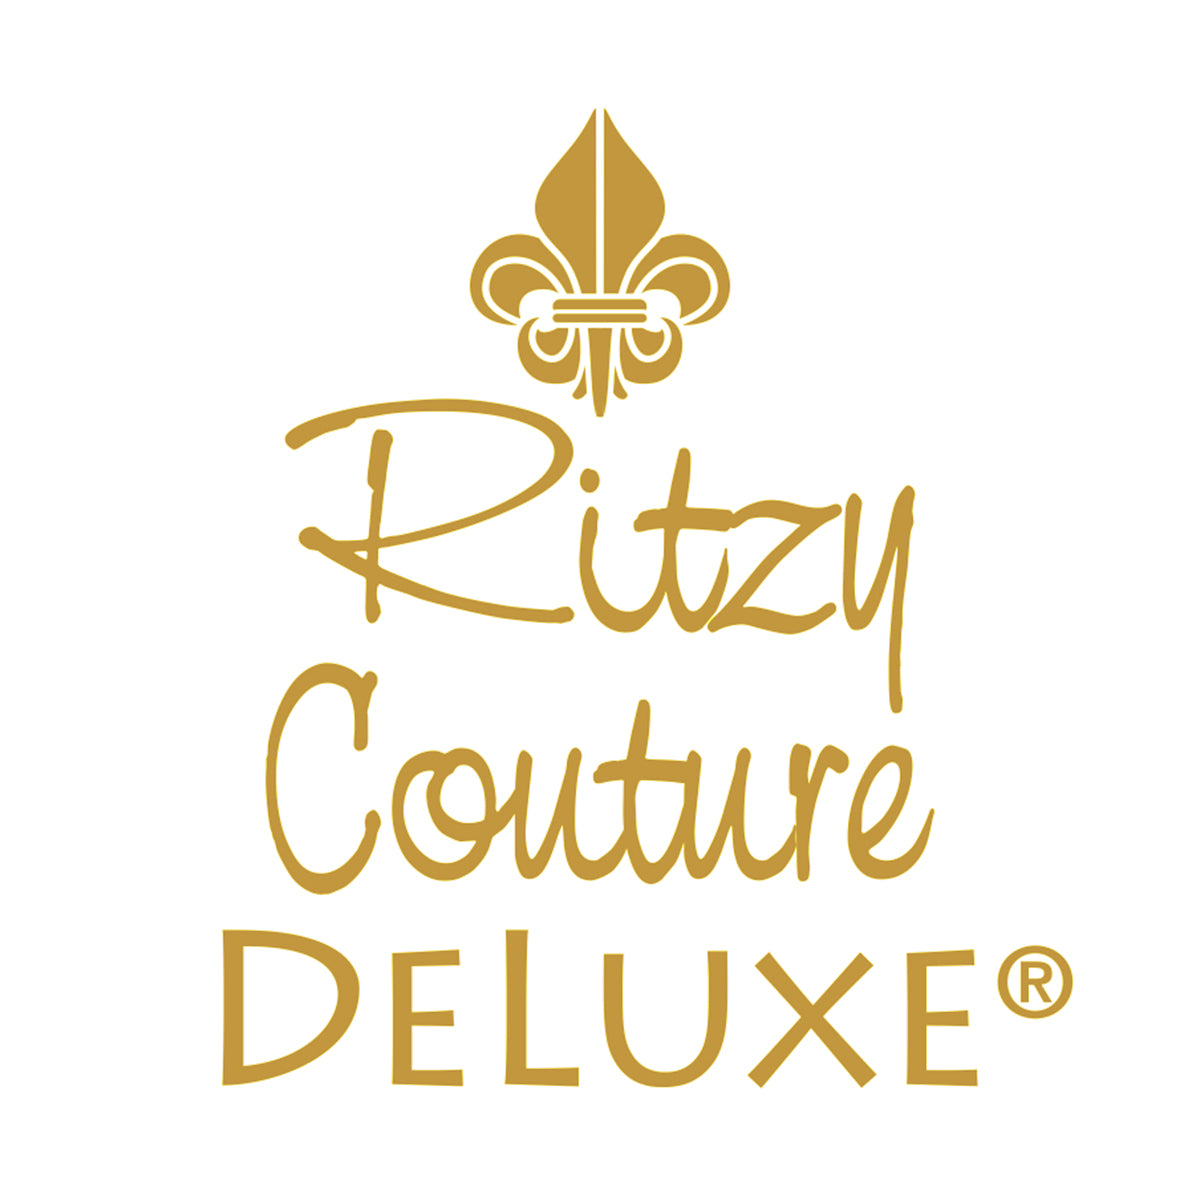 Ritzy Couture DeLuxe Wild Animal Hinged Cuff Bracelet 22k Gold Plated - Size Medium